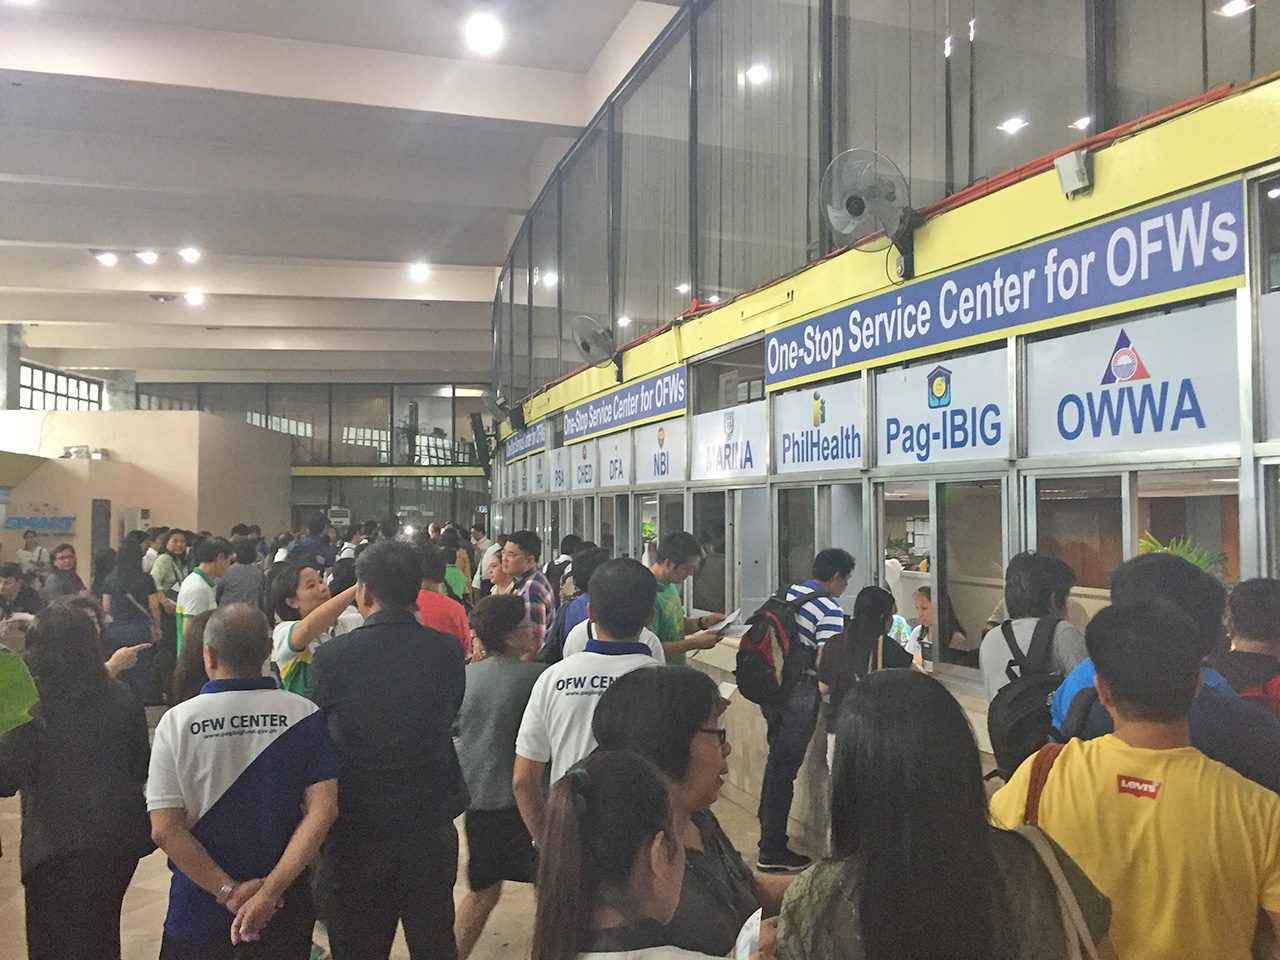 One-stop service center for OFWs opens for business